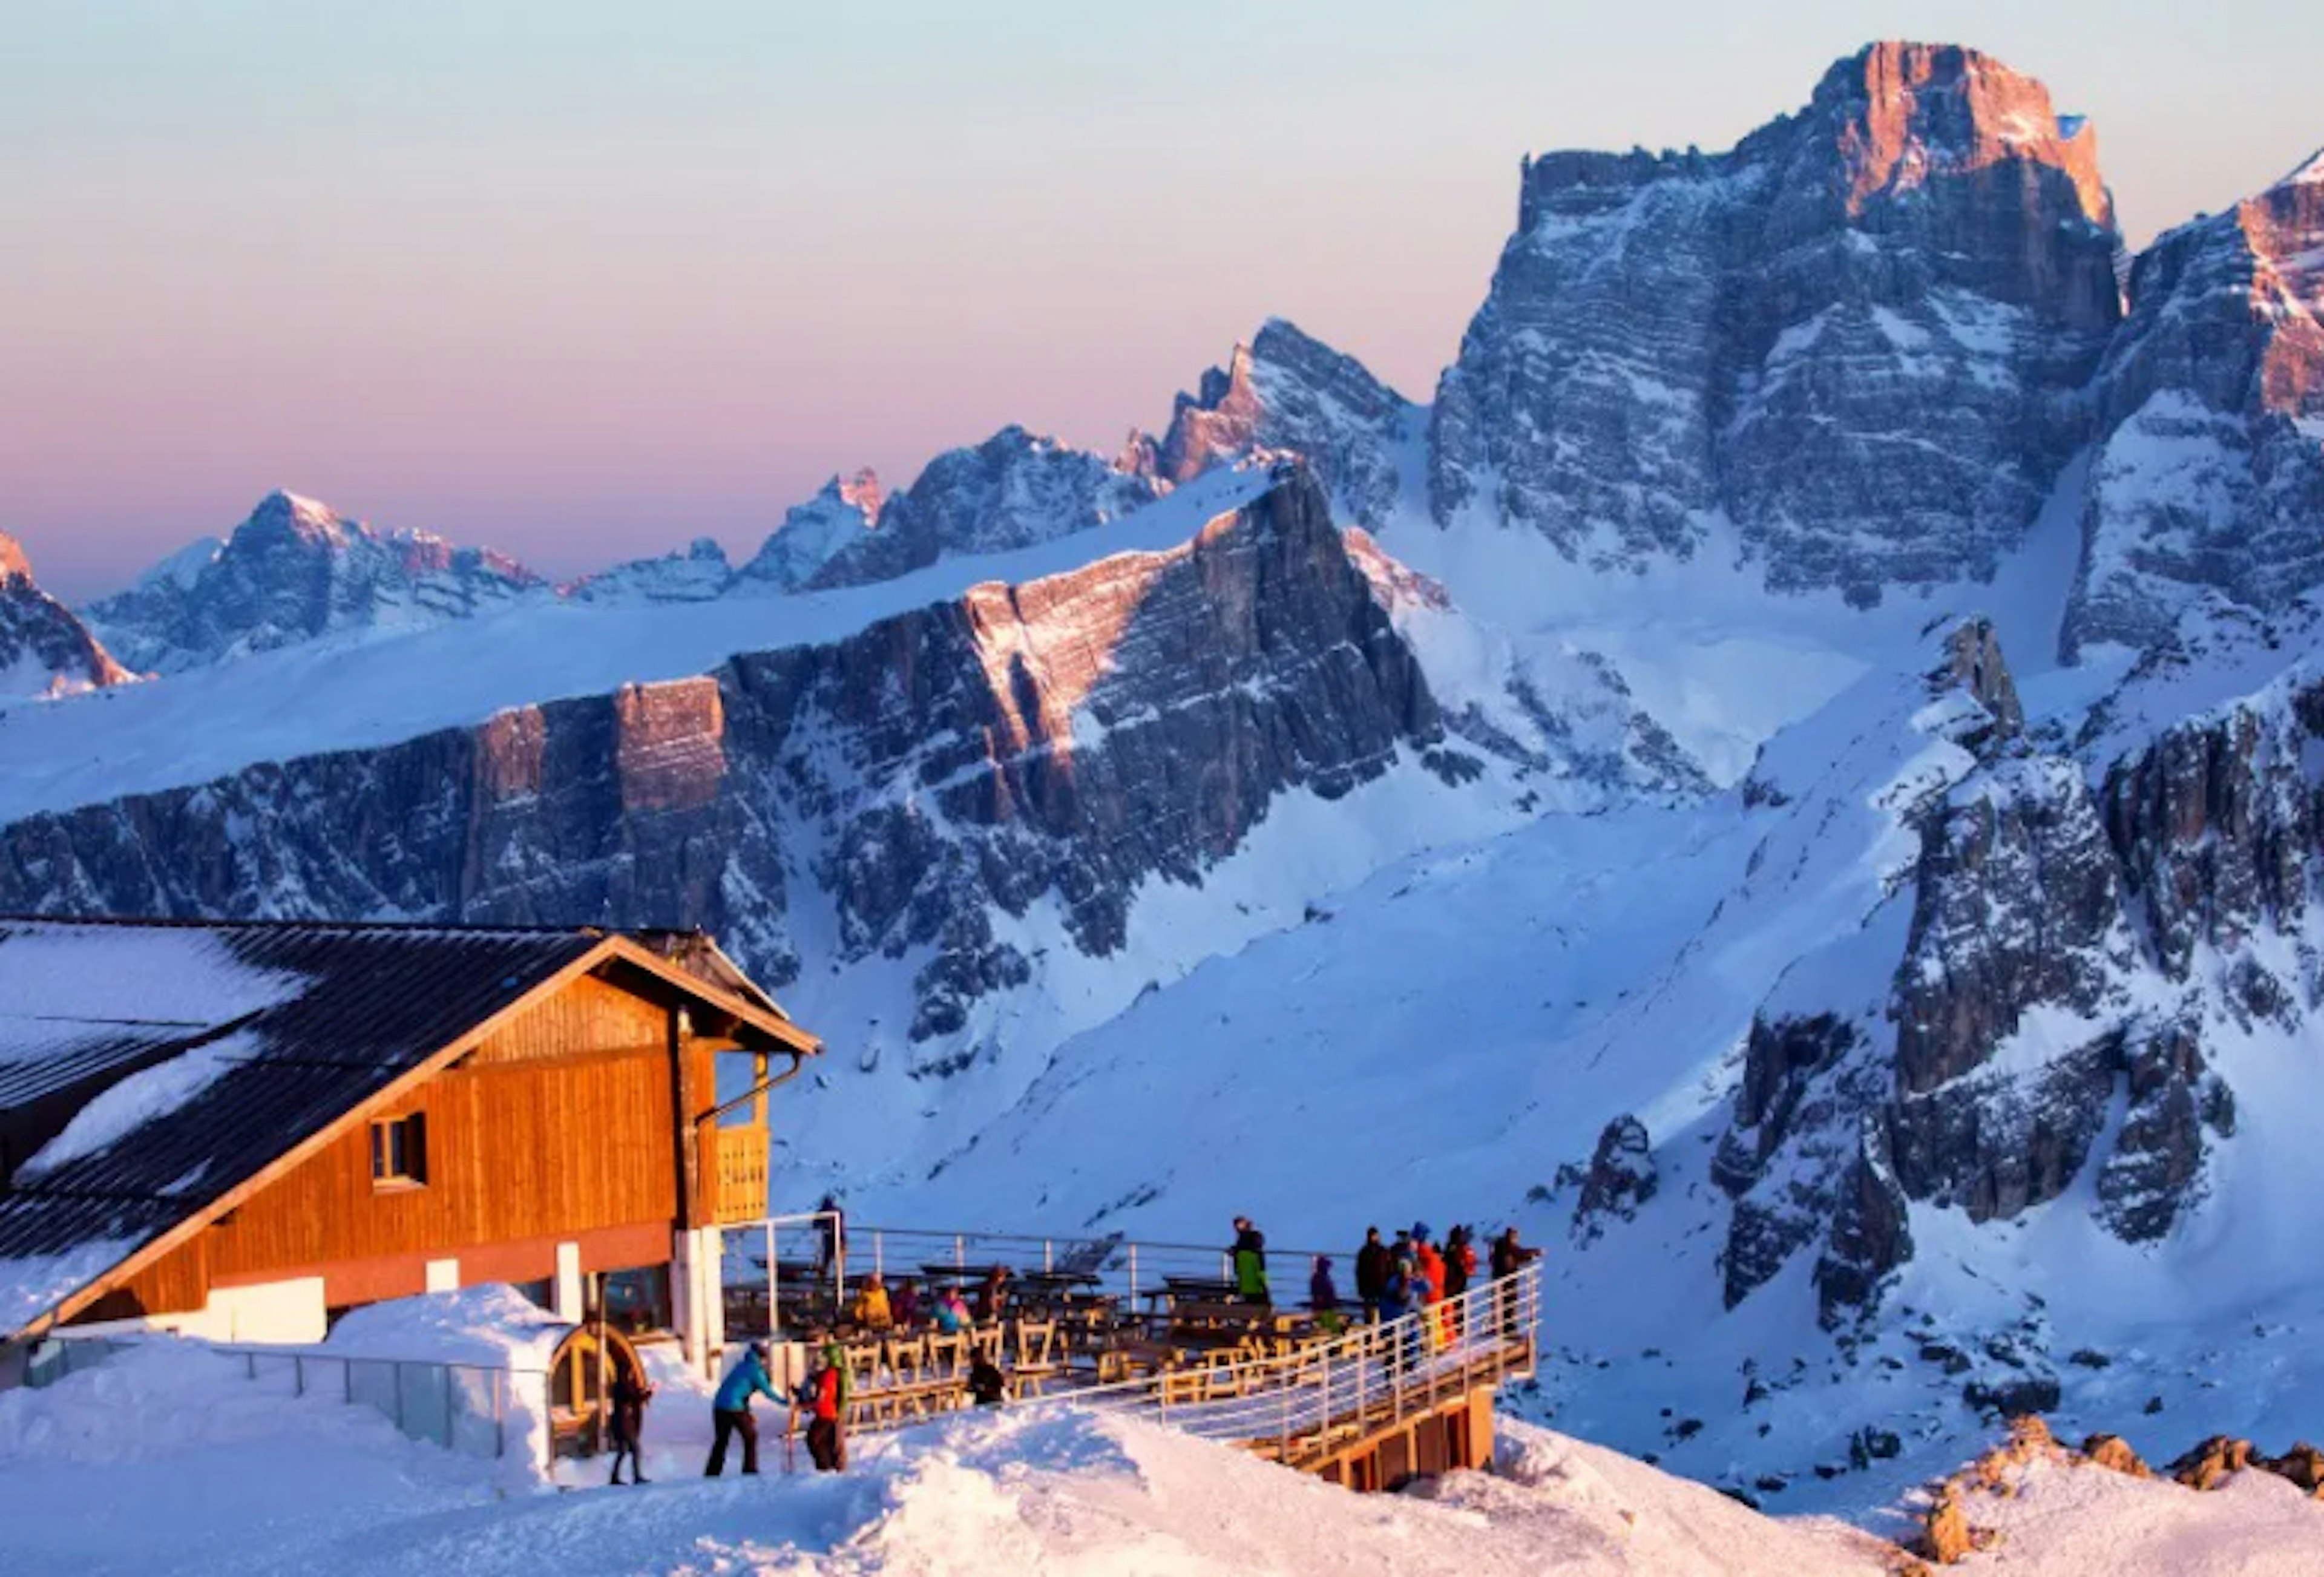 Rifugio Lagazuoi and Cable car station against the background of the Dolomites at sunset. Winter Alps near Cortina d'Ampezzo, Veneto, Italy.